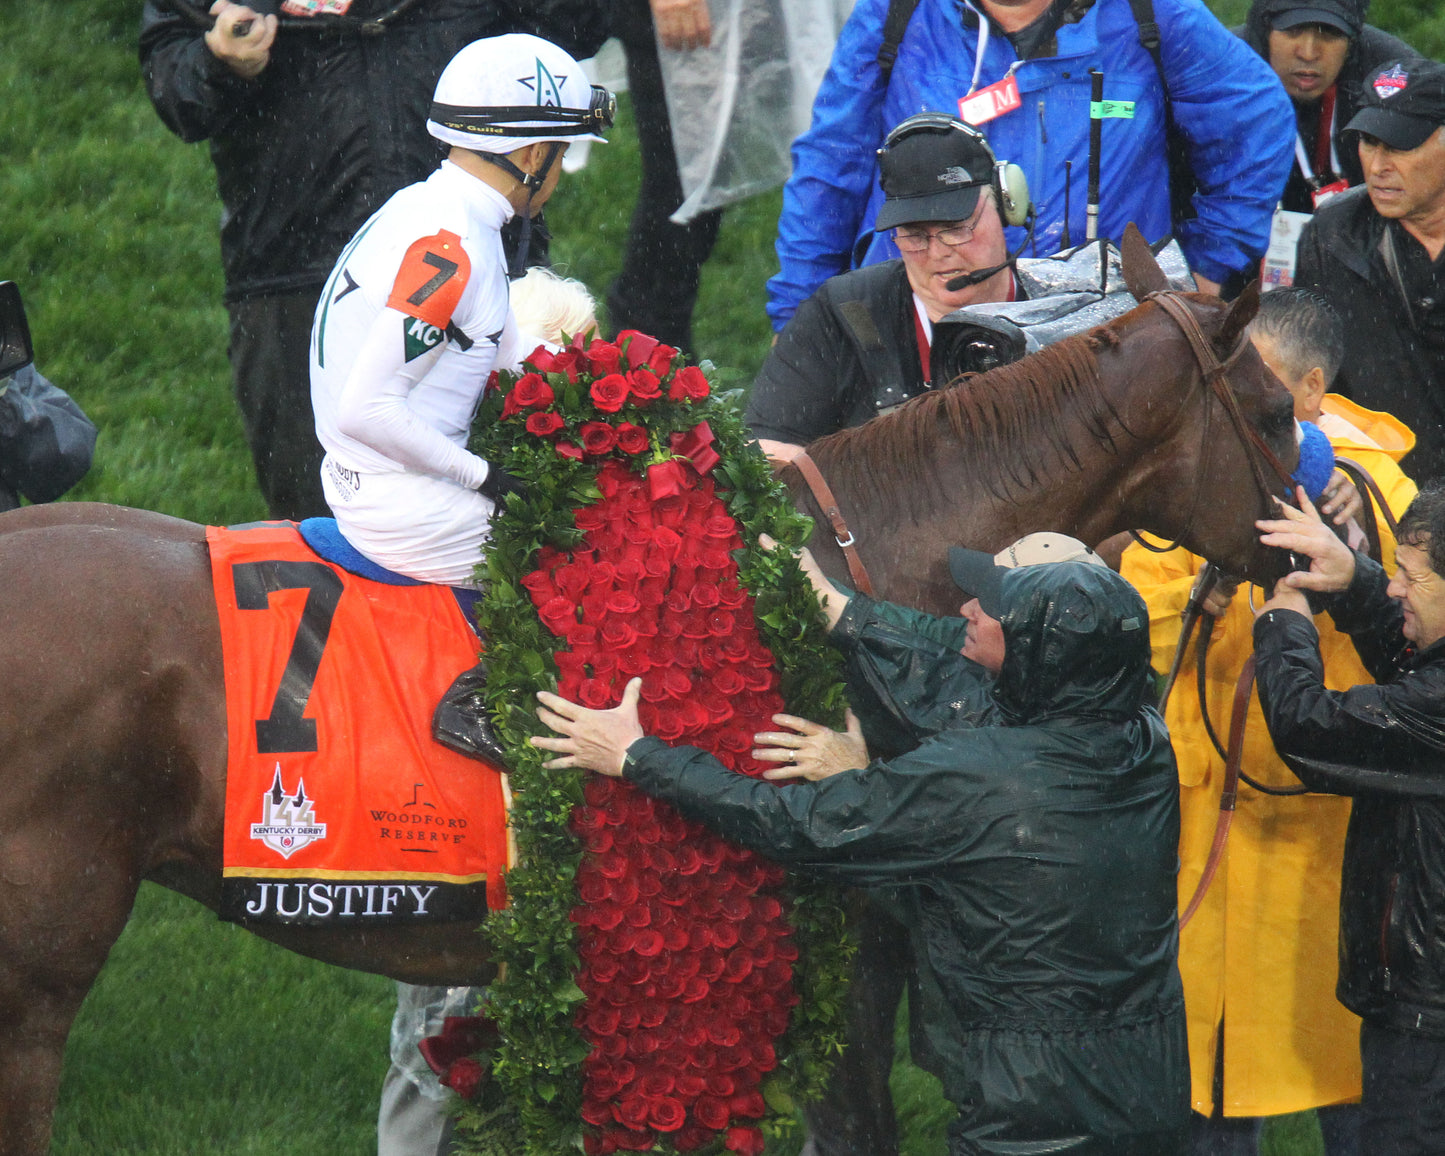 JUSTIFY - 050518 - Race 12 - CD The Kentucky Derby G1 - Rose Garland 01